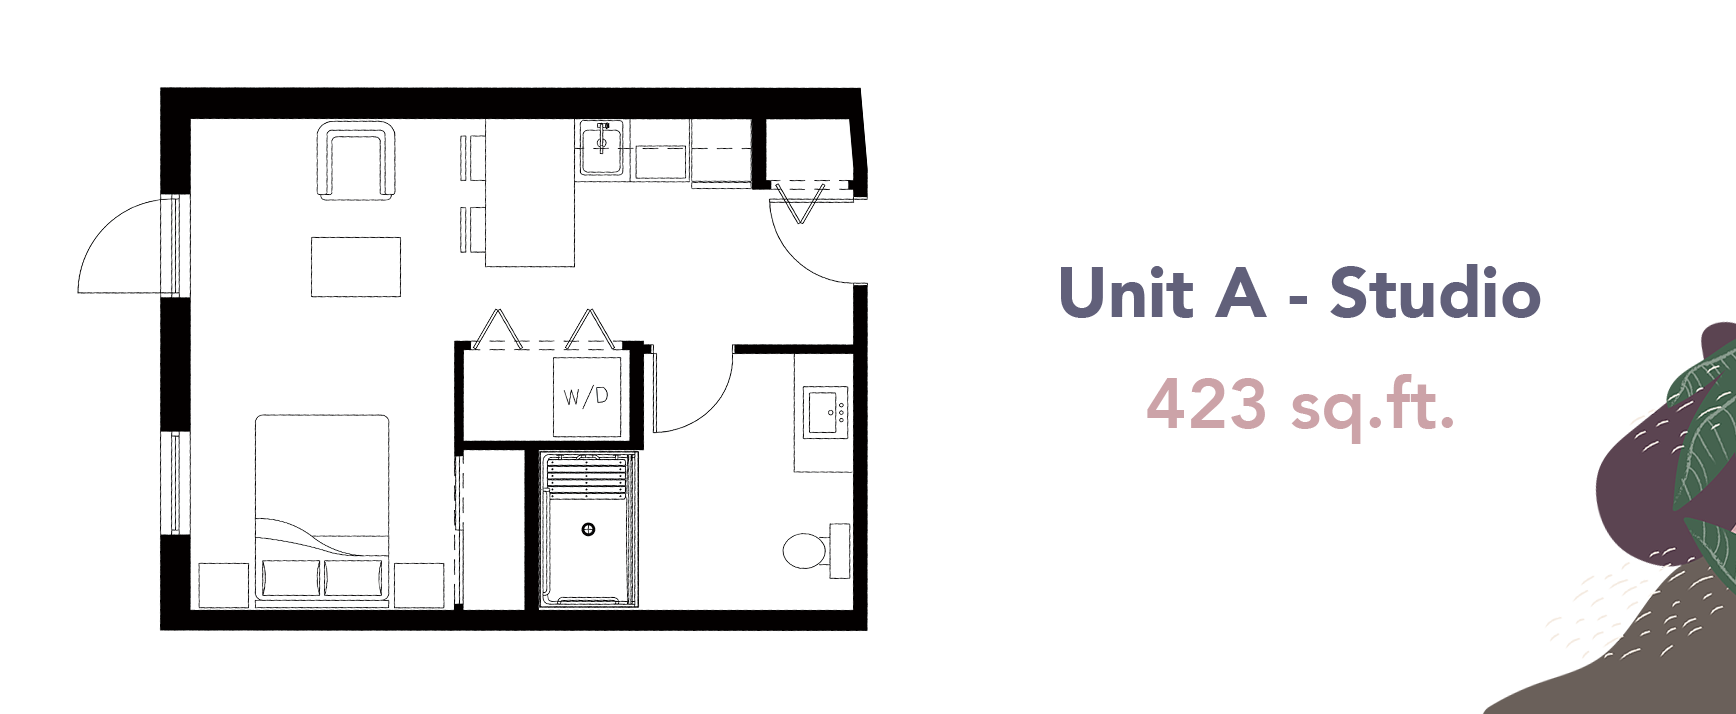 The floor plan of a Wisteria Place studio suite